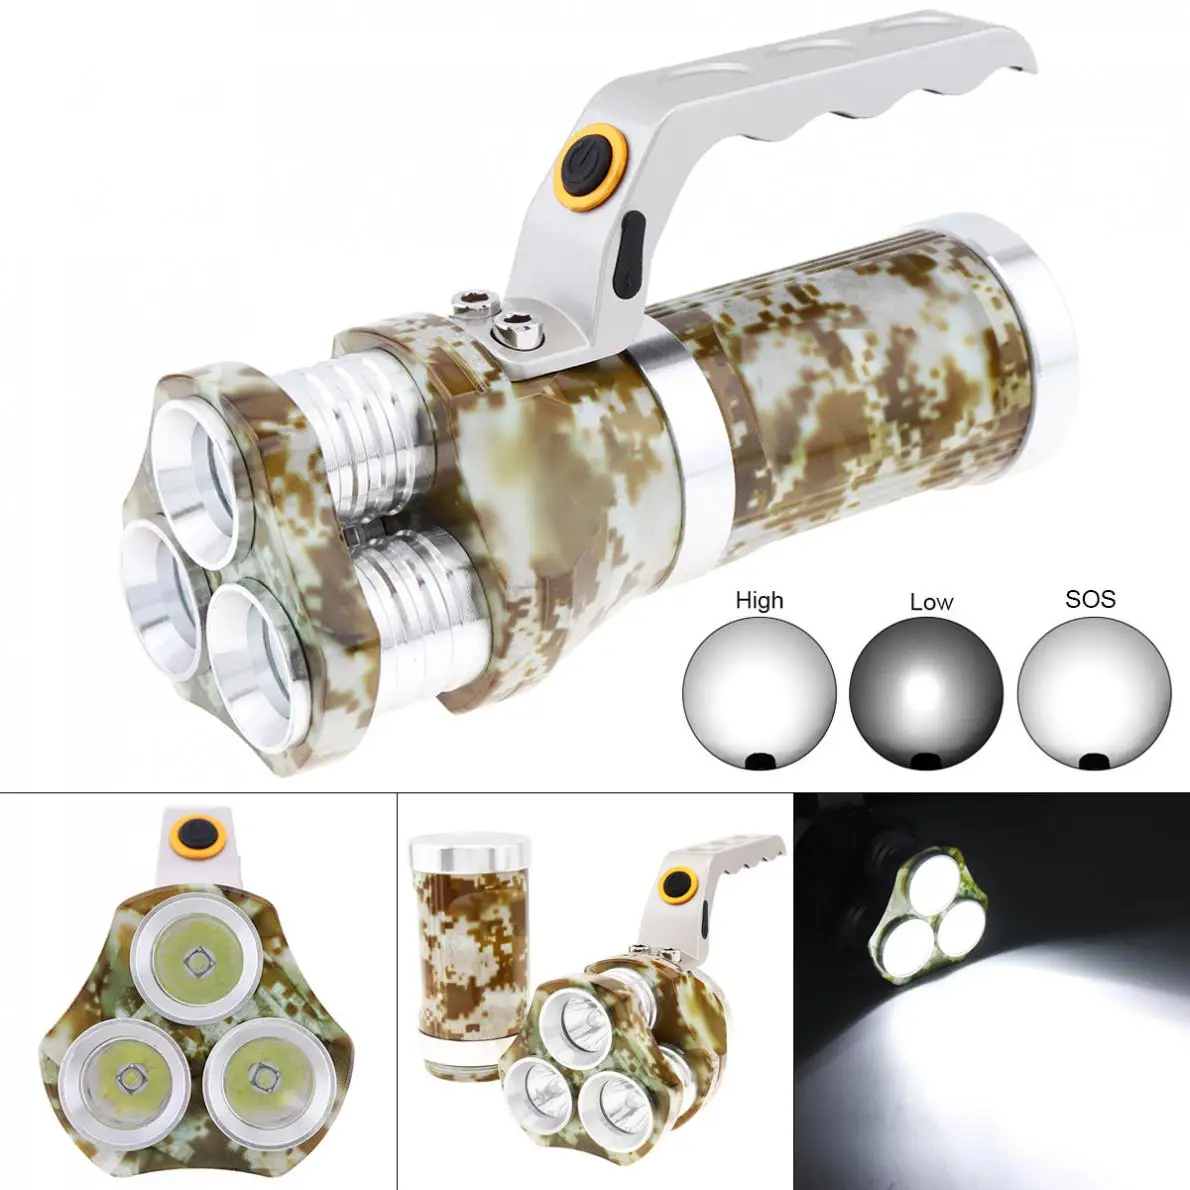 

Waterproof 3 Modes Light 3000 Lumens 3 LED Handheld Torch Flashlight Searchlight Rechargeable for Outdoor Hunting